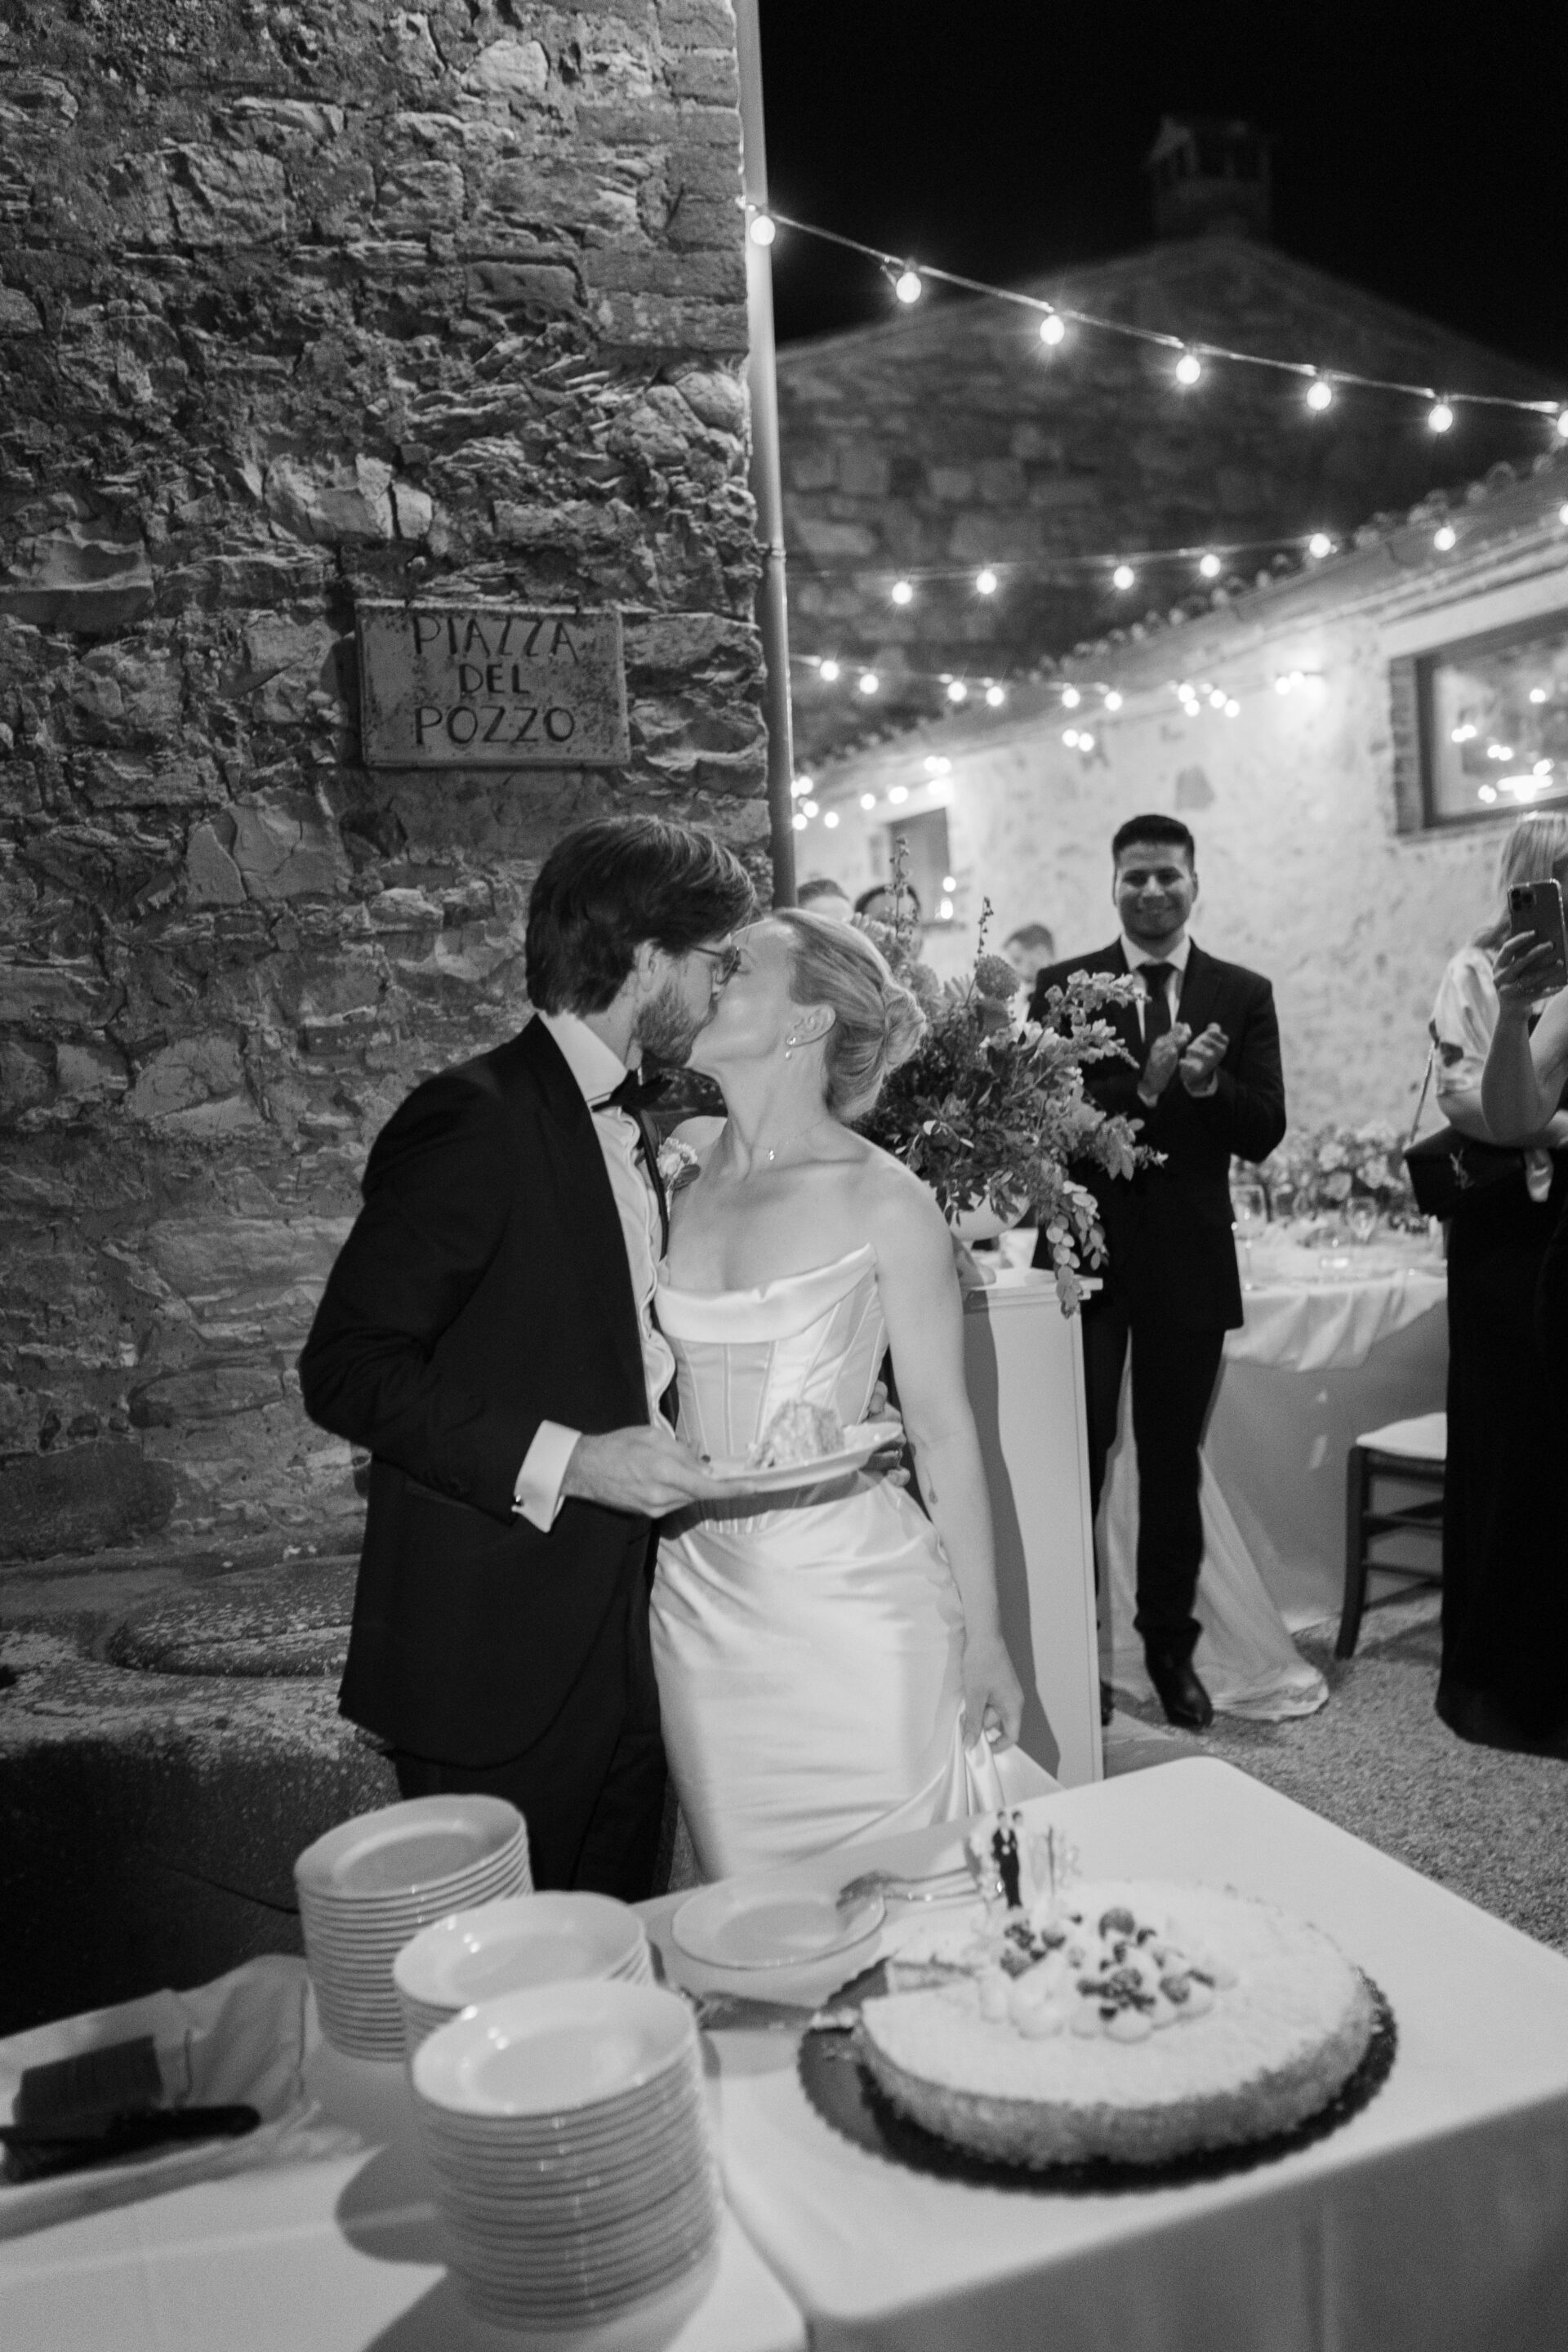 The bride and groom cut the cake at their luxury Tuscan wedding